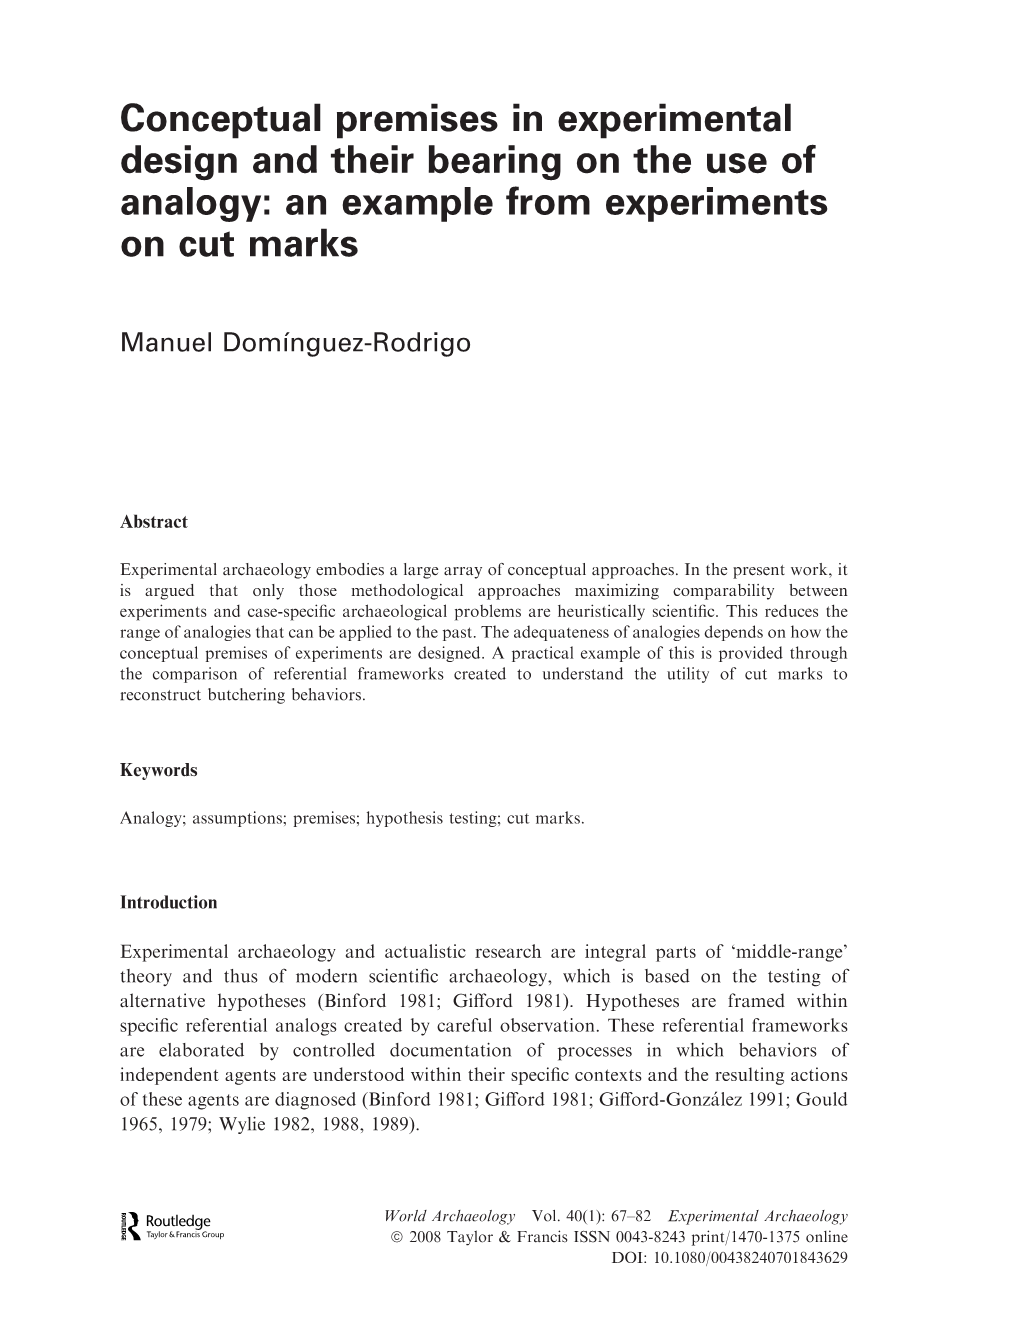 Conceptual Premises in Experimental Design and Their Bearing on the Use of Analogy: an Example from Experiments on Cut Marks